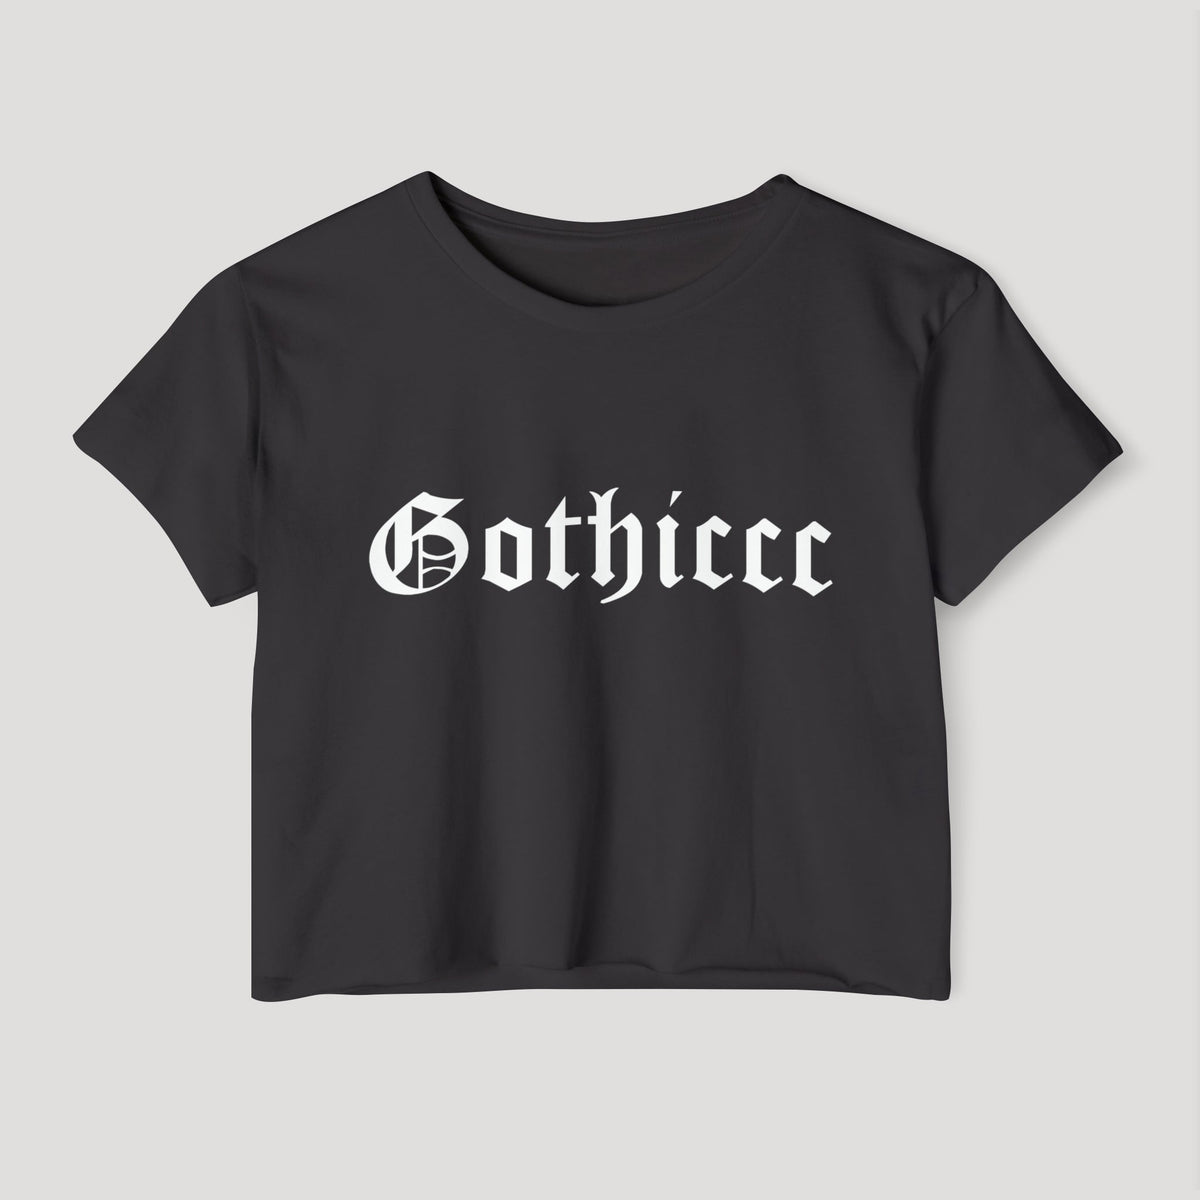 Gothiccc Women's Lightweight Crop Top (READY TO SHIP) - Goth Cloth Co.20923445789992698000